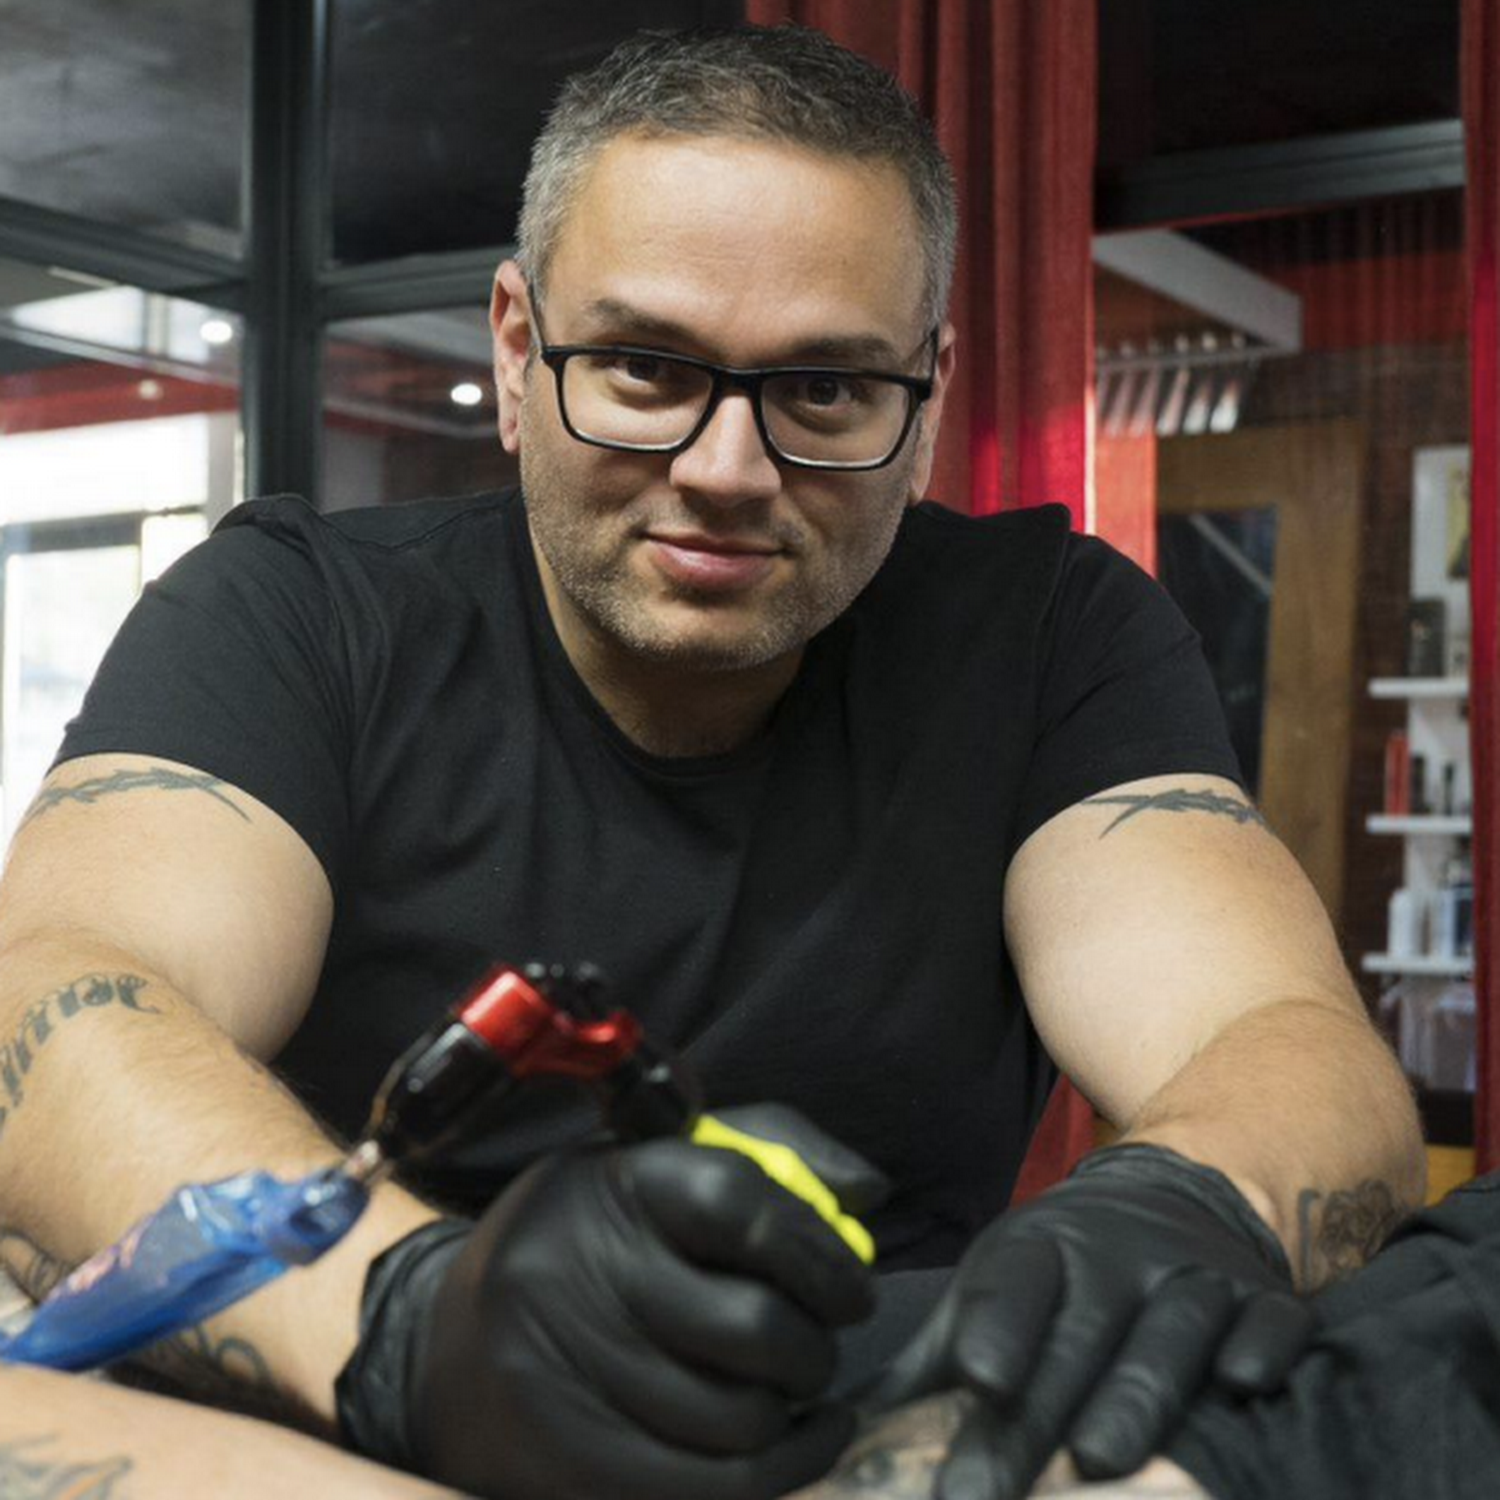 Move Over Kim K Sa Tattoo Artist Lew Williams Is A Global Reality Show Star With Stigmas To Break